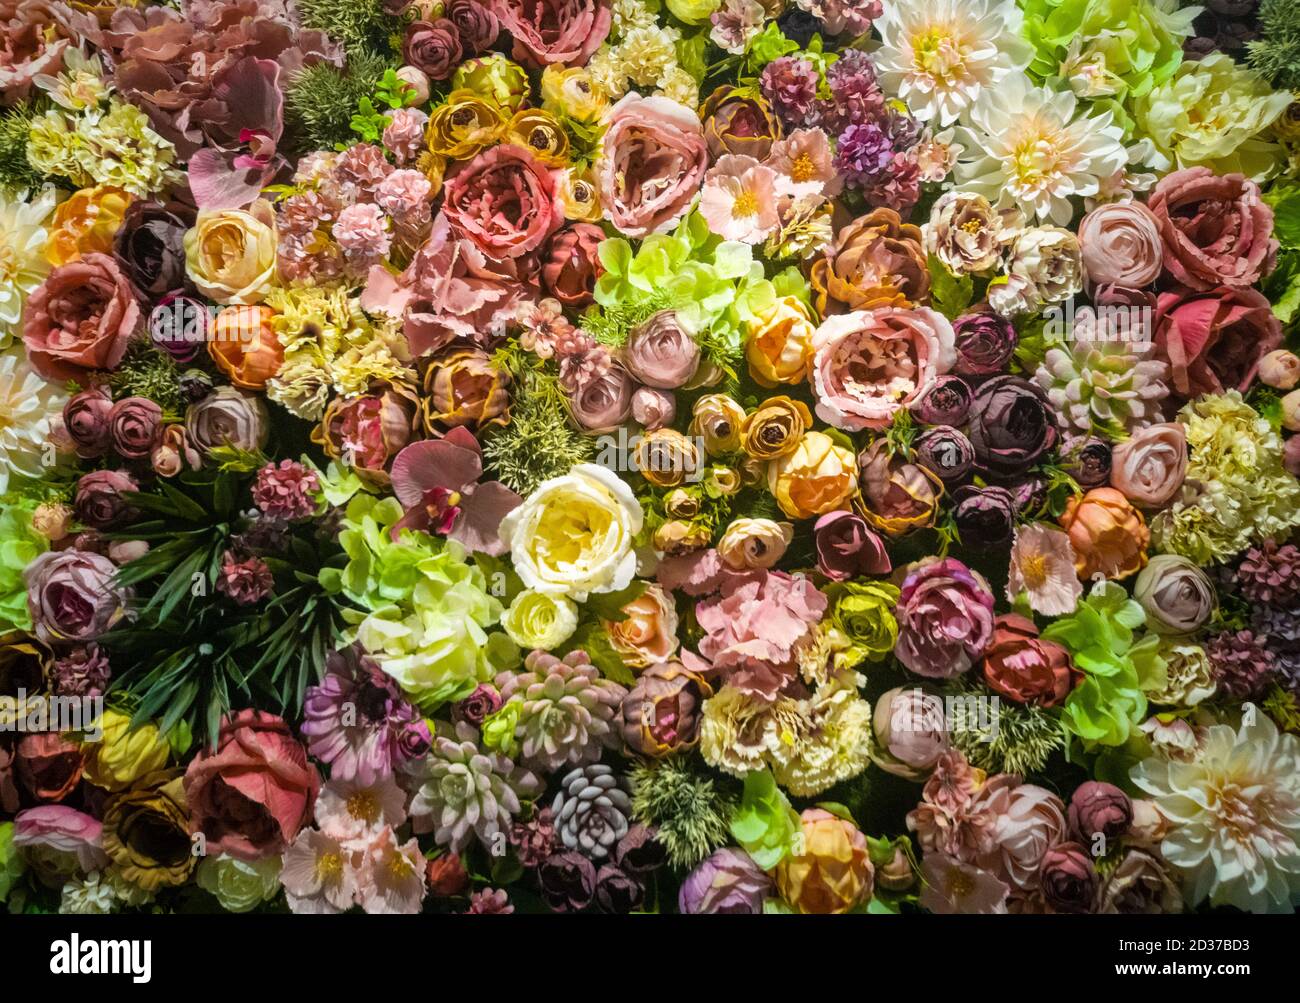 Vintage bouquet of beautiful flowers on black. Floral background. Baroque  old fashiones style. Natural pattern wallpaper or greeting card Stock Photo  - Alamy